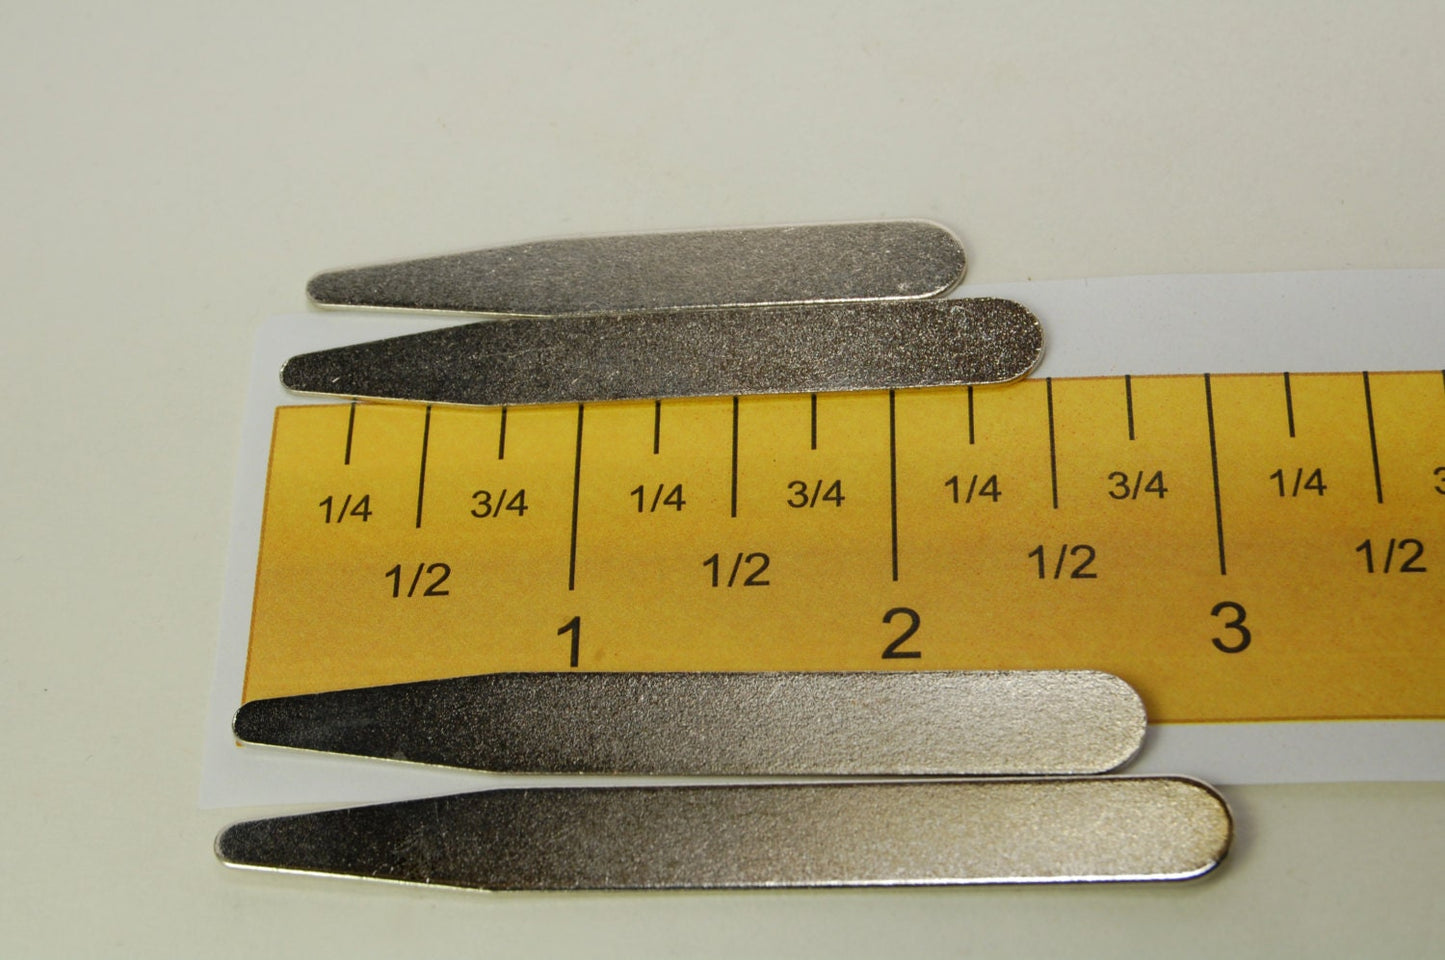 Set of 5  matte metal COLLAR STAYS / TIPS - 4 sizes: 2 1/4", 2 1/2", 2 3/4, 3" long x 3/8" (9mm) wide + add storage box